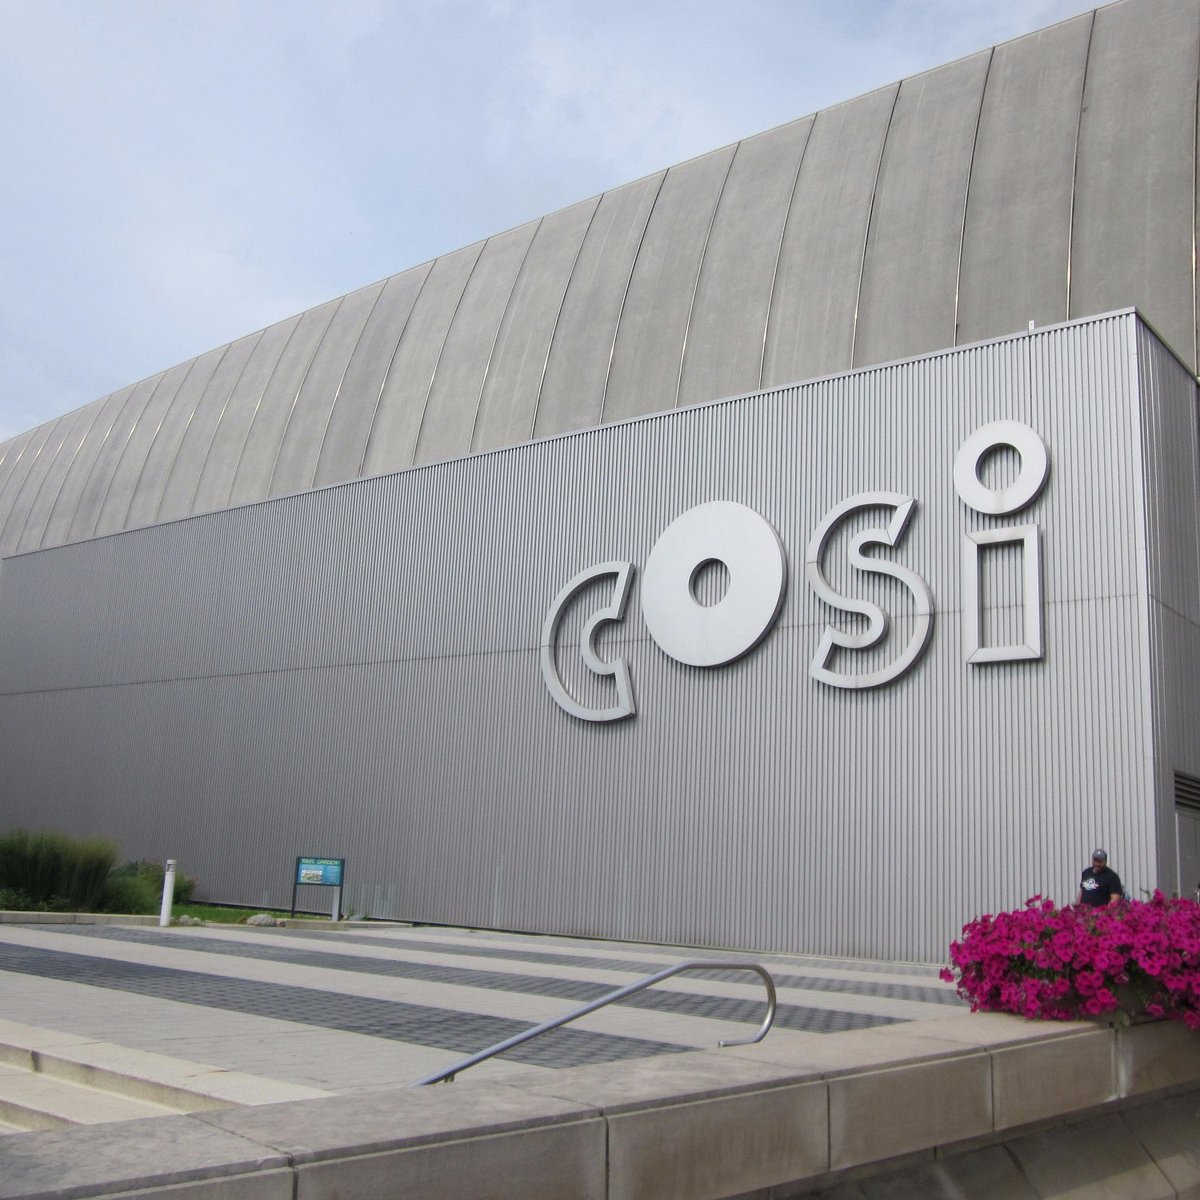 Collection 94+ Images center of science and industry (cosi) Full HD, 2k, 4k